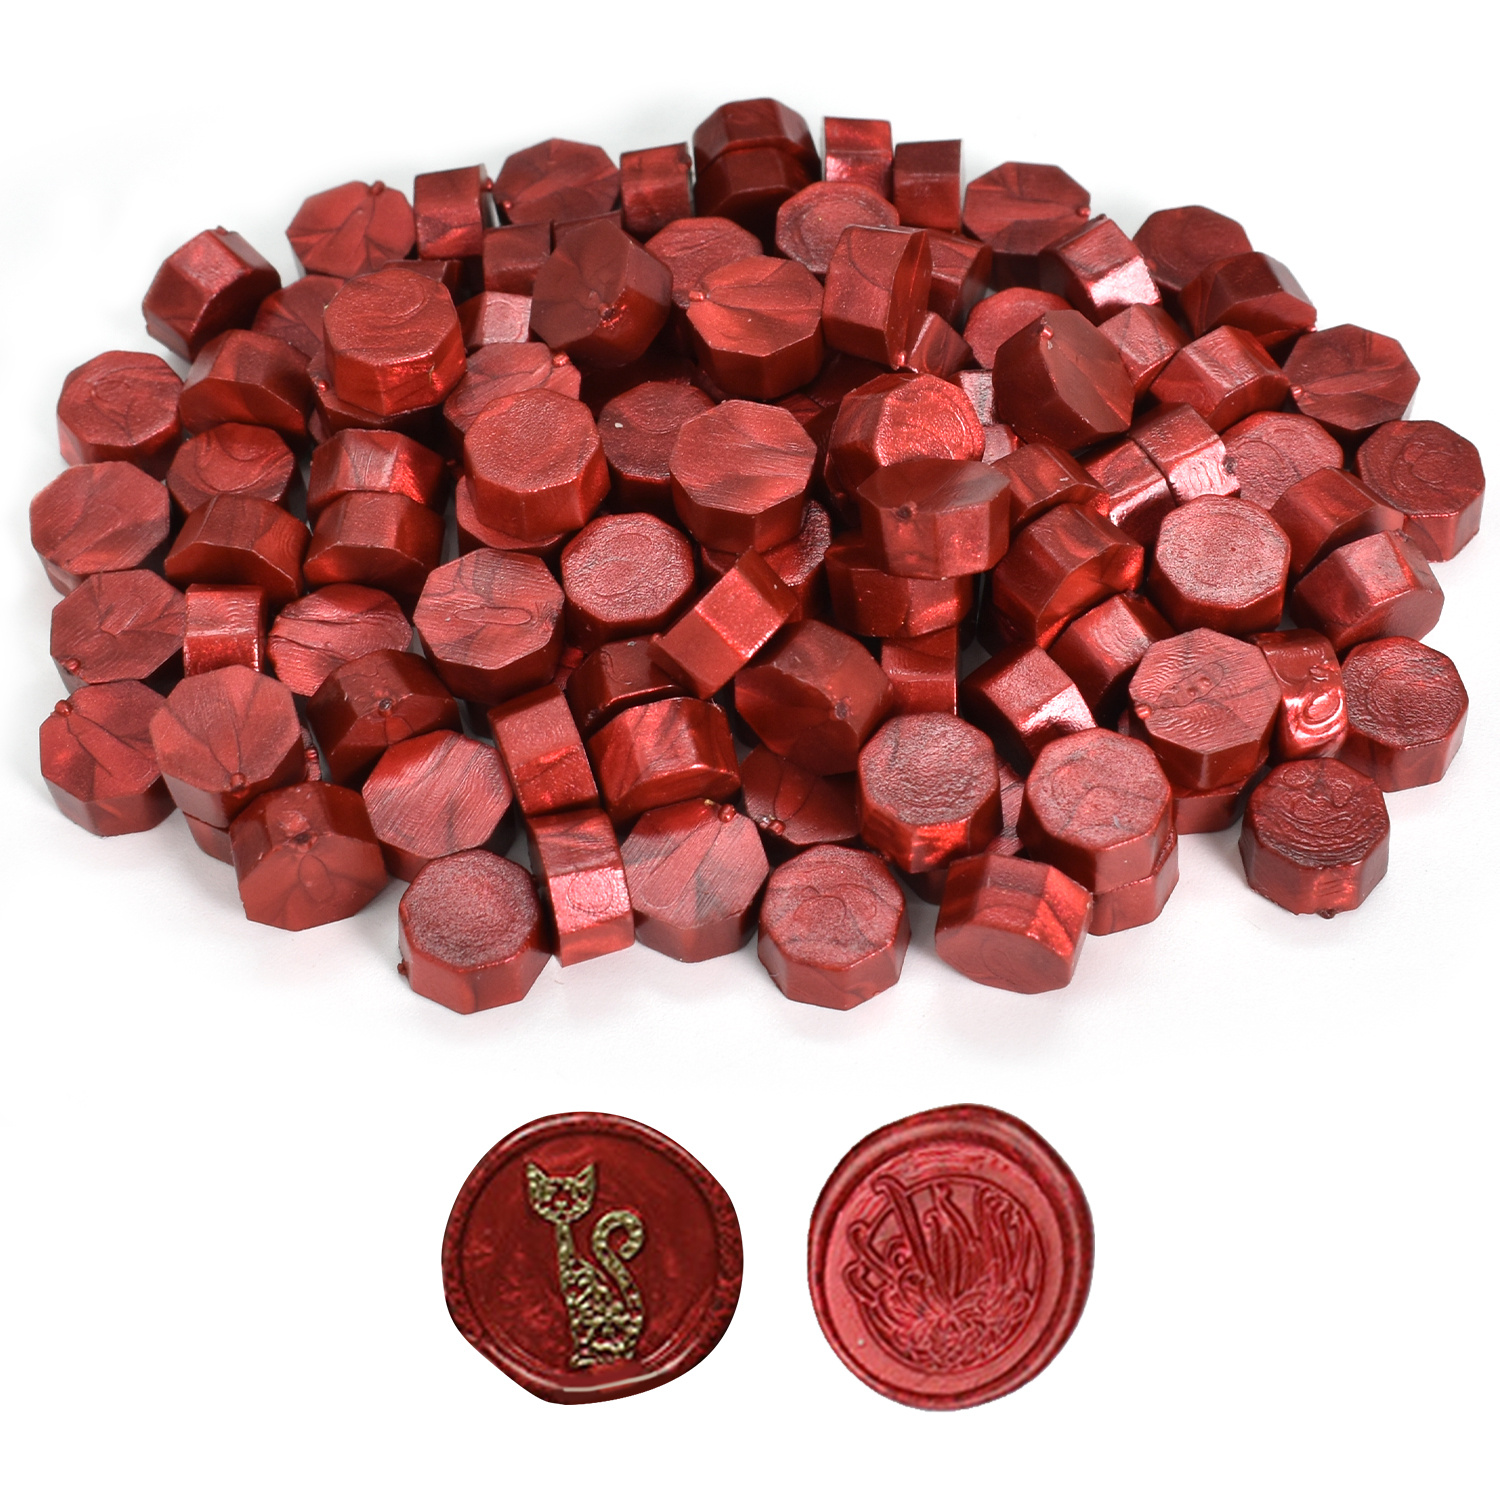  250pcs Wax Seal Beads Red, Andotopee Premium Sealing Wax Beads  for Stamp Seals, Octagon Wax Pellets Refill Pack for Wax Seal Kit, Wedding  Invitation, Letter Envelope Seal, DIY Crafts (Red) 